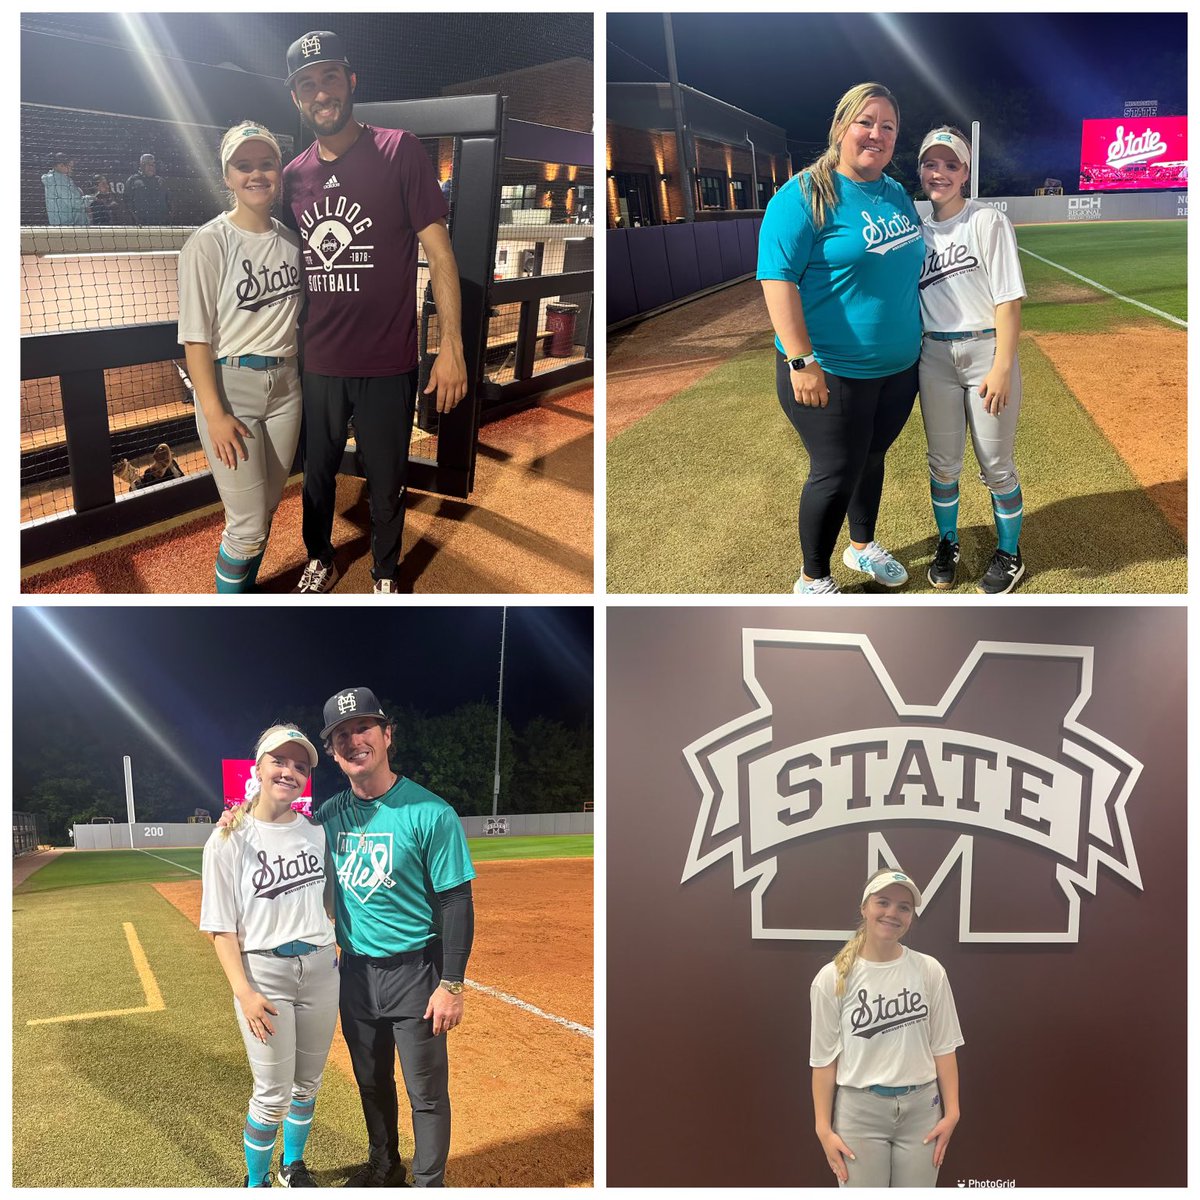 Thank you @Coach_Ricketts @MrCoachTbratt & @CoachZacShaw for a great camp! The instruction was great, the campus was beautiful and it was special to be there on #allforalex day! #NoOneFightsAlone 🦋 @HailStateSB @BhamBolts2027 #BHMboltsMADE ⚡️#HailState #tigermentality